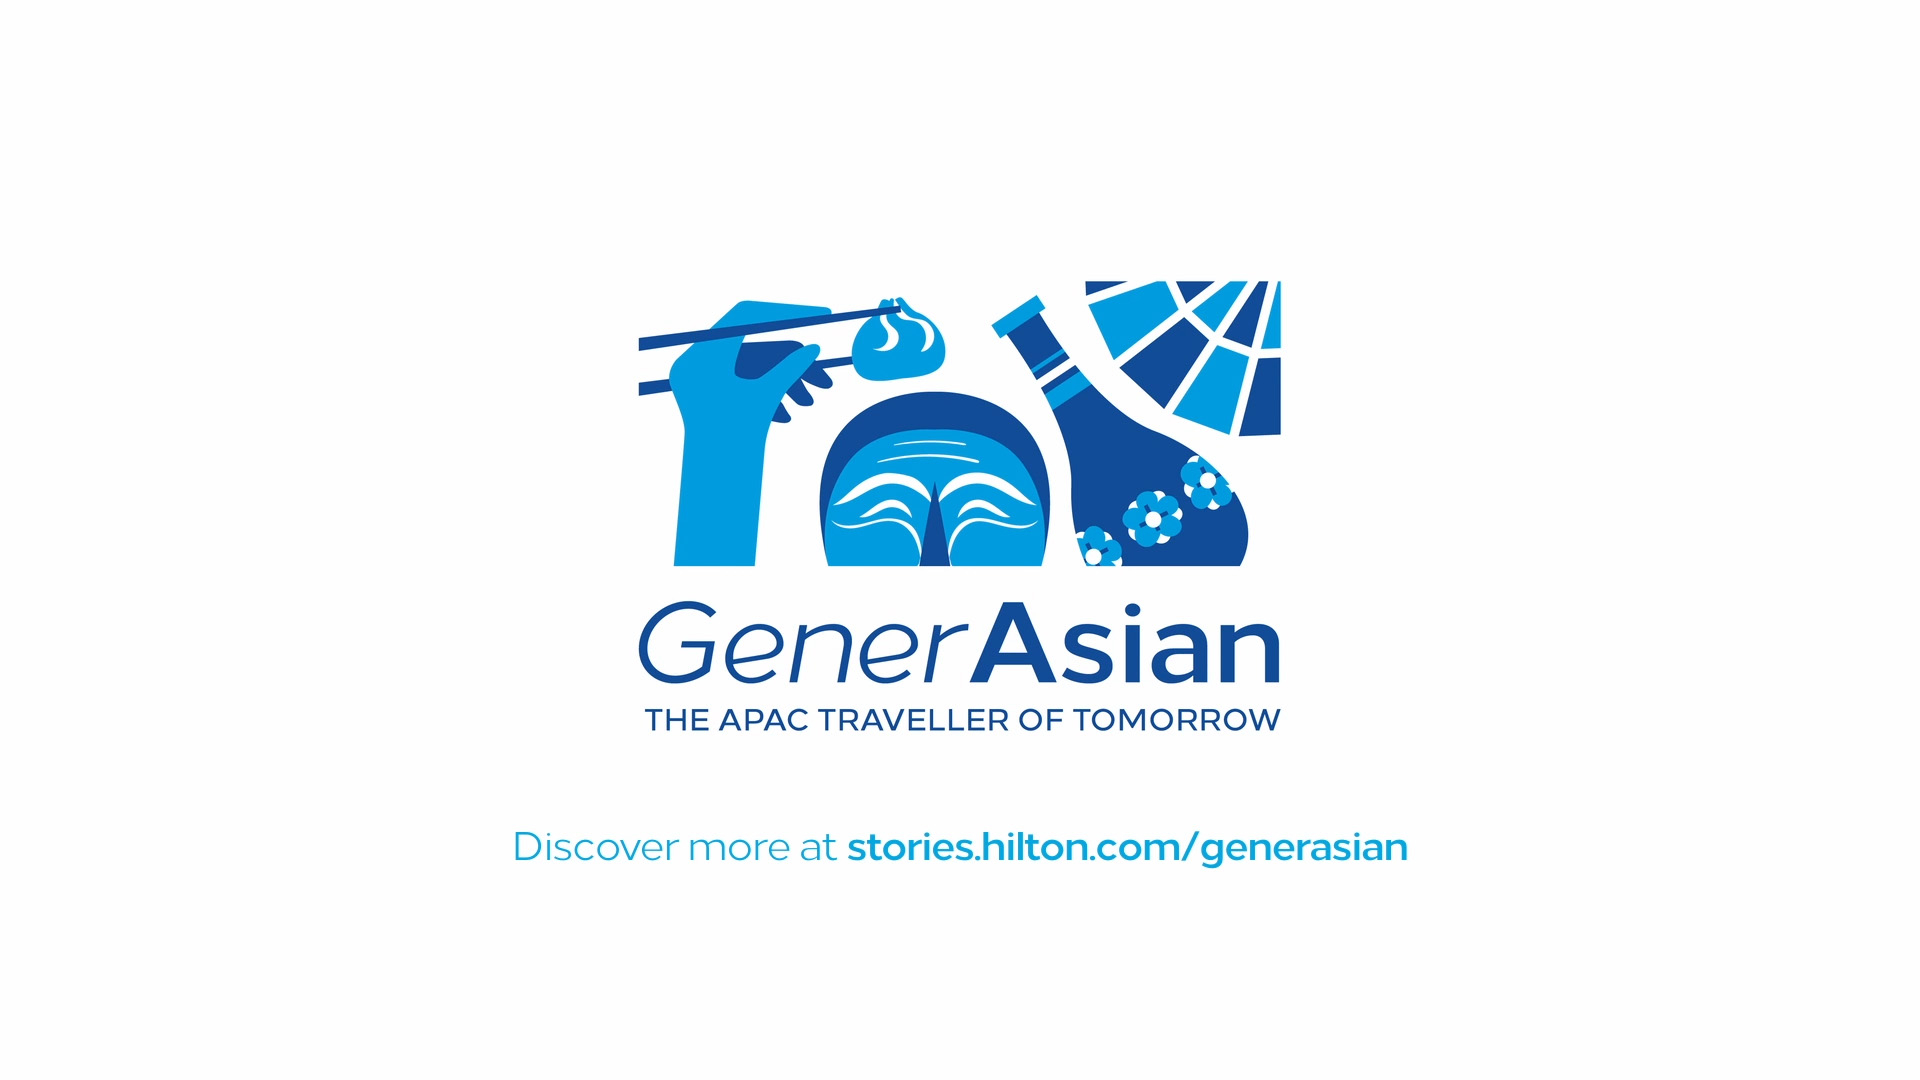 As Hilton releases its 2024 Trends Report, the leading global hospitality company has discovered an emerging generation of Asian travelers who are pursuing travel that will enable them to better understand their identity. Dubbed as the ‘GenerAsian traveler’ are Asians who are inspired by self-discovery and have a desire for a deeper understanding of their own cultural and ancestral heritage through travel.